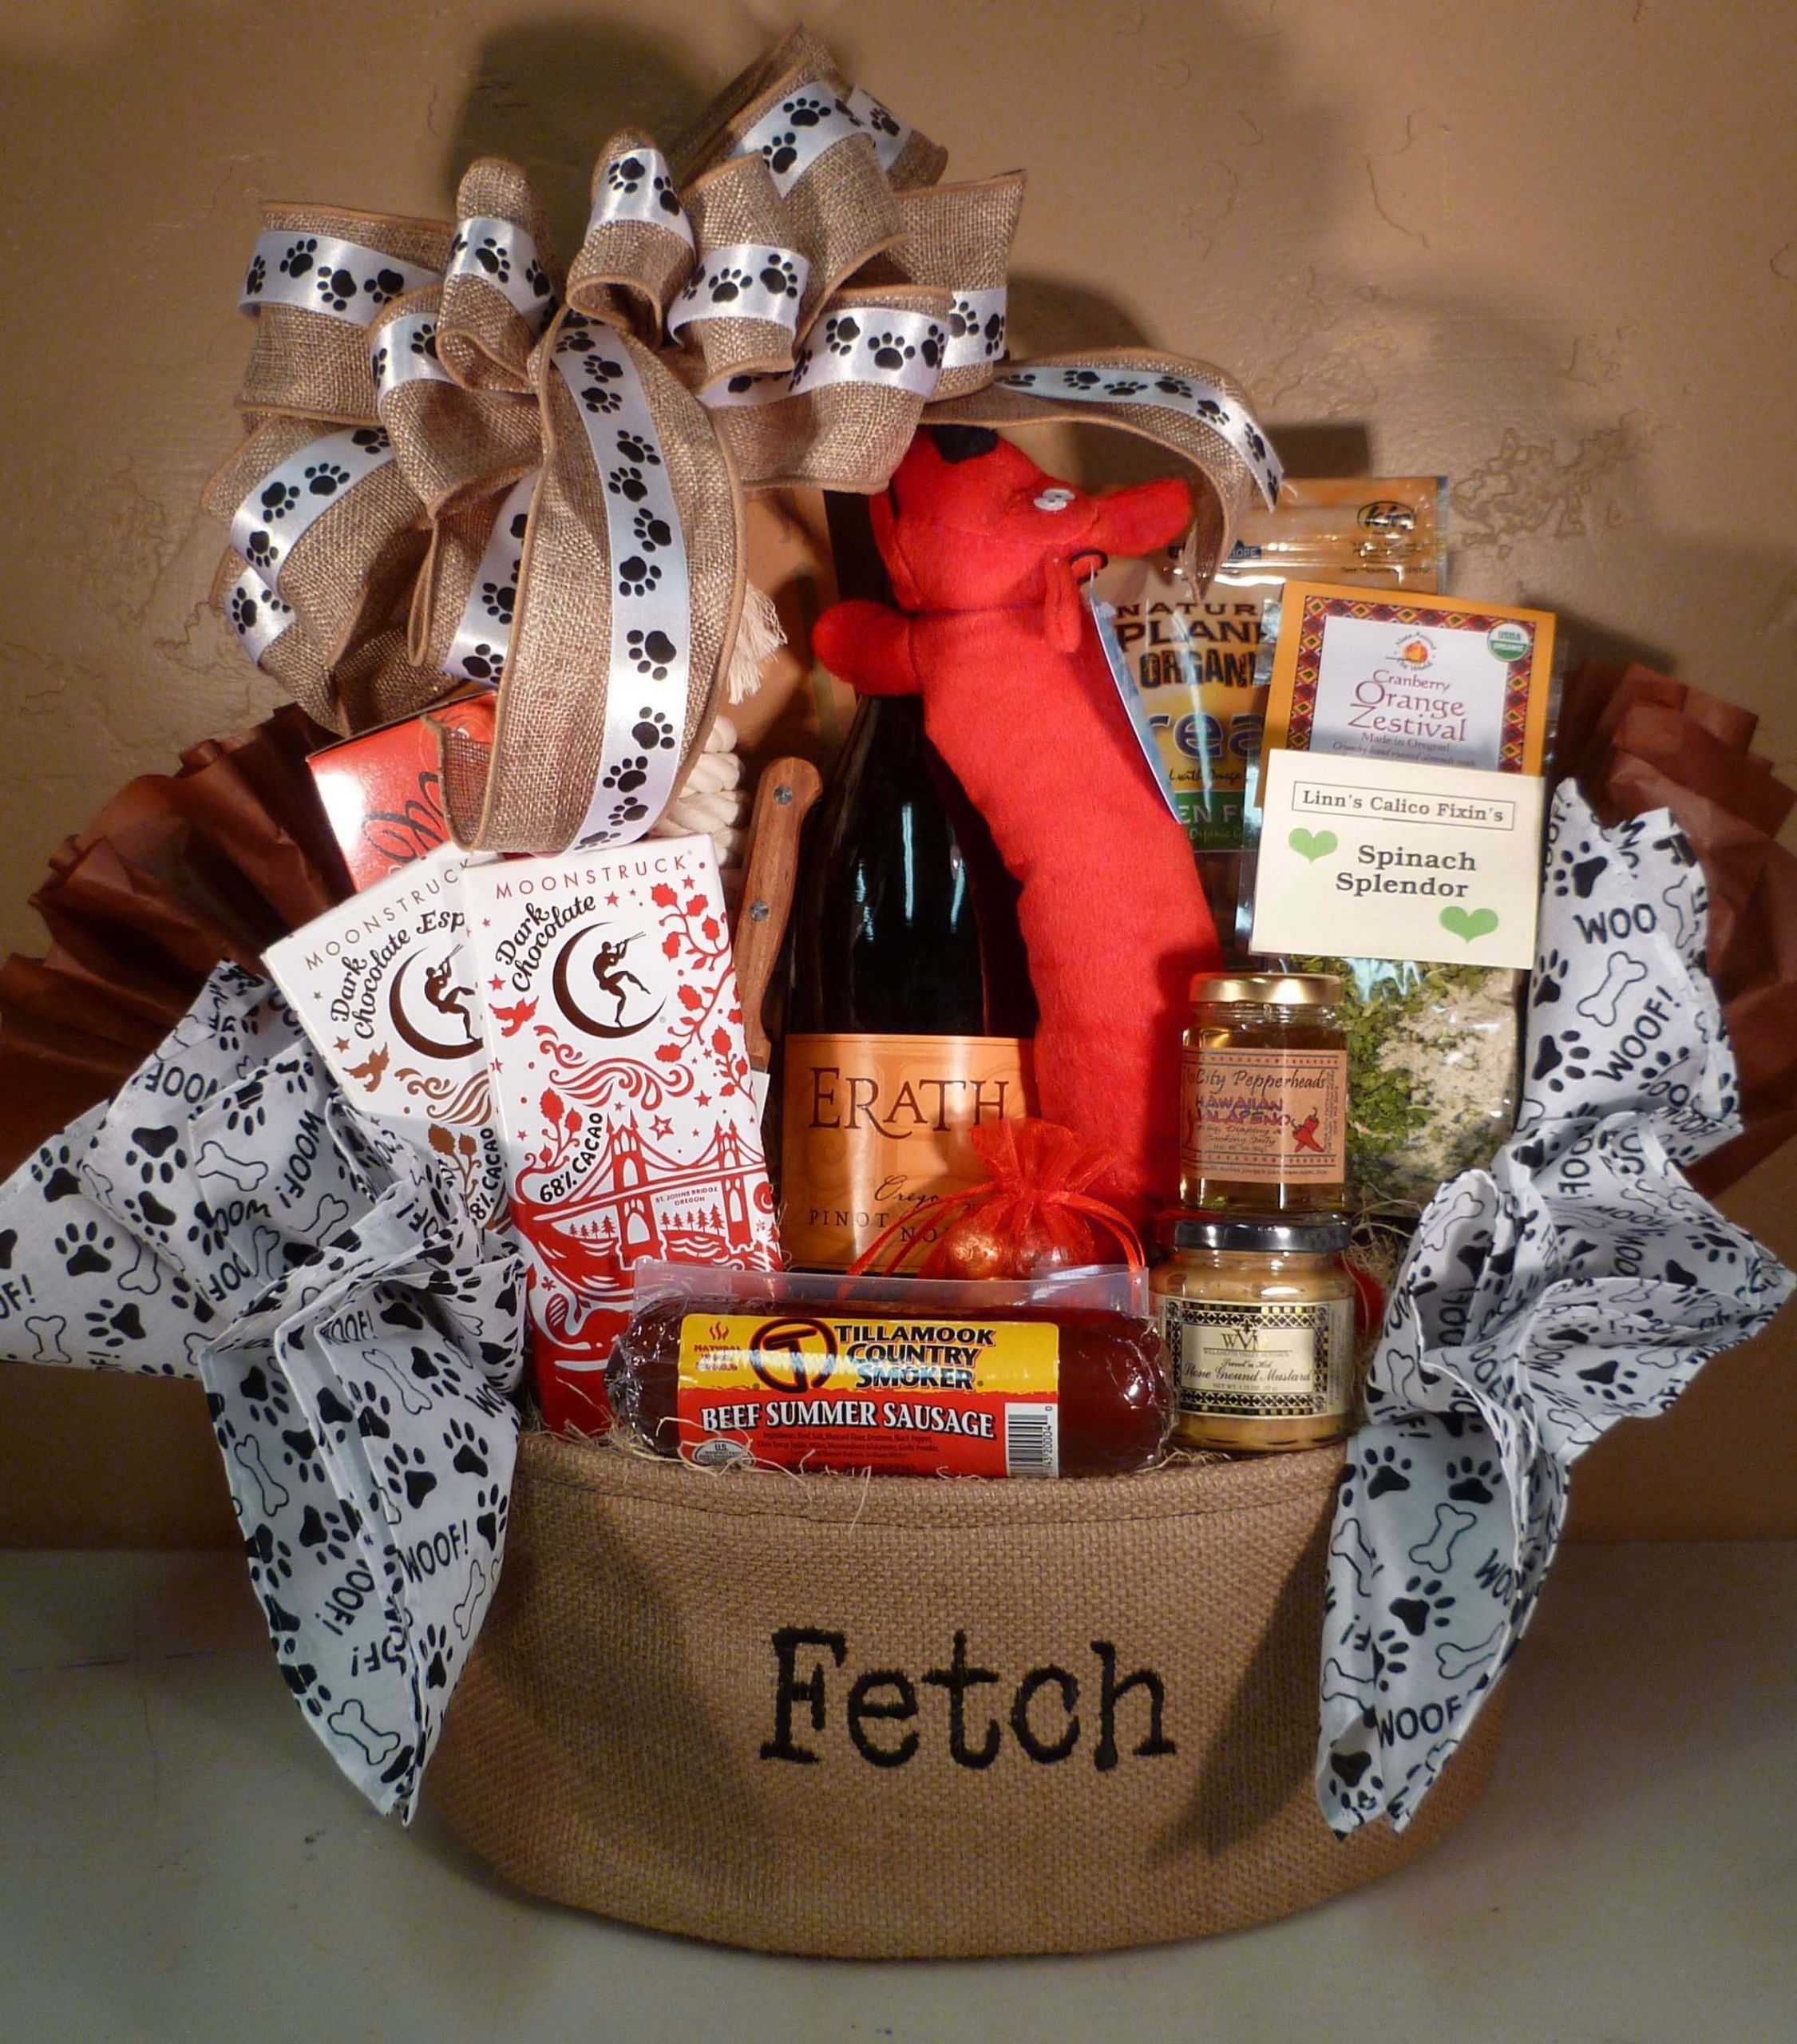 Wine Themed Gift Basket Ideas
 Dog Themed basket for raffle idea mix of treats for